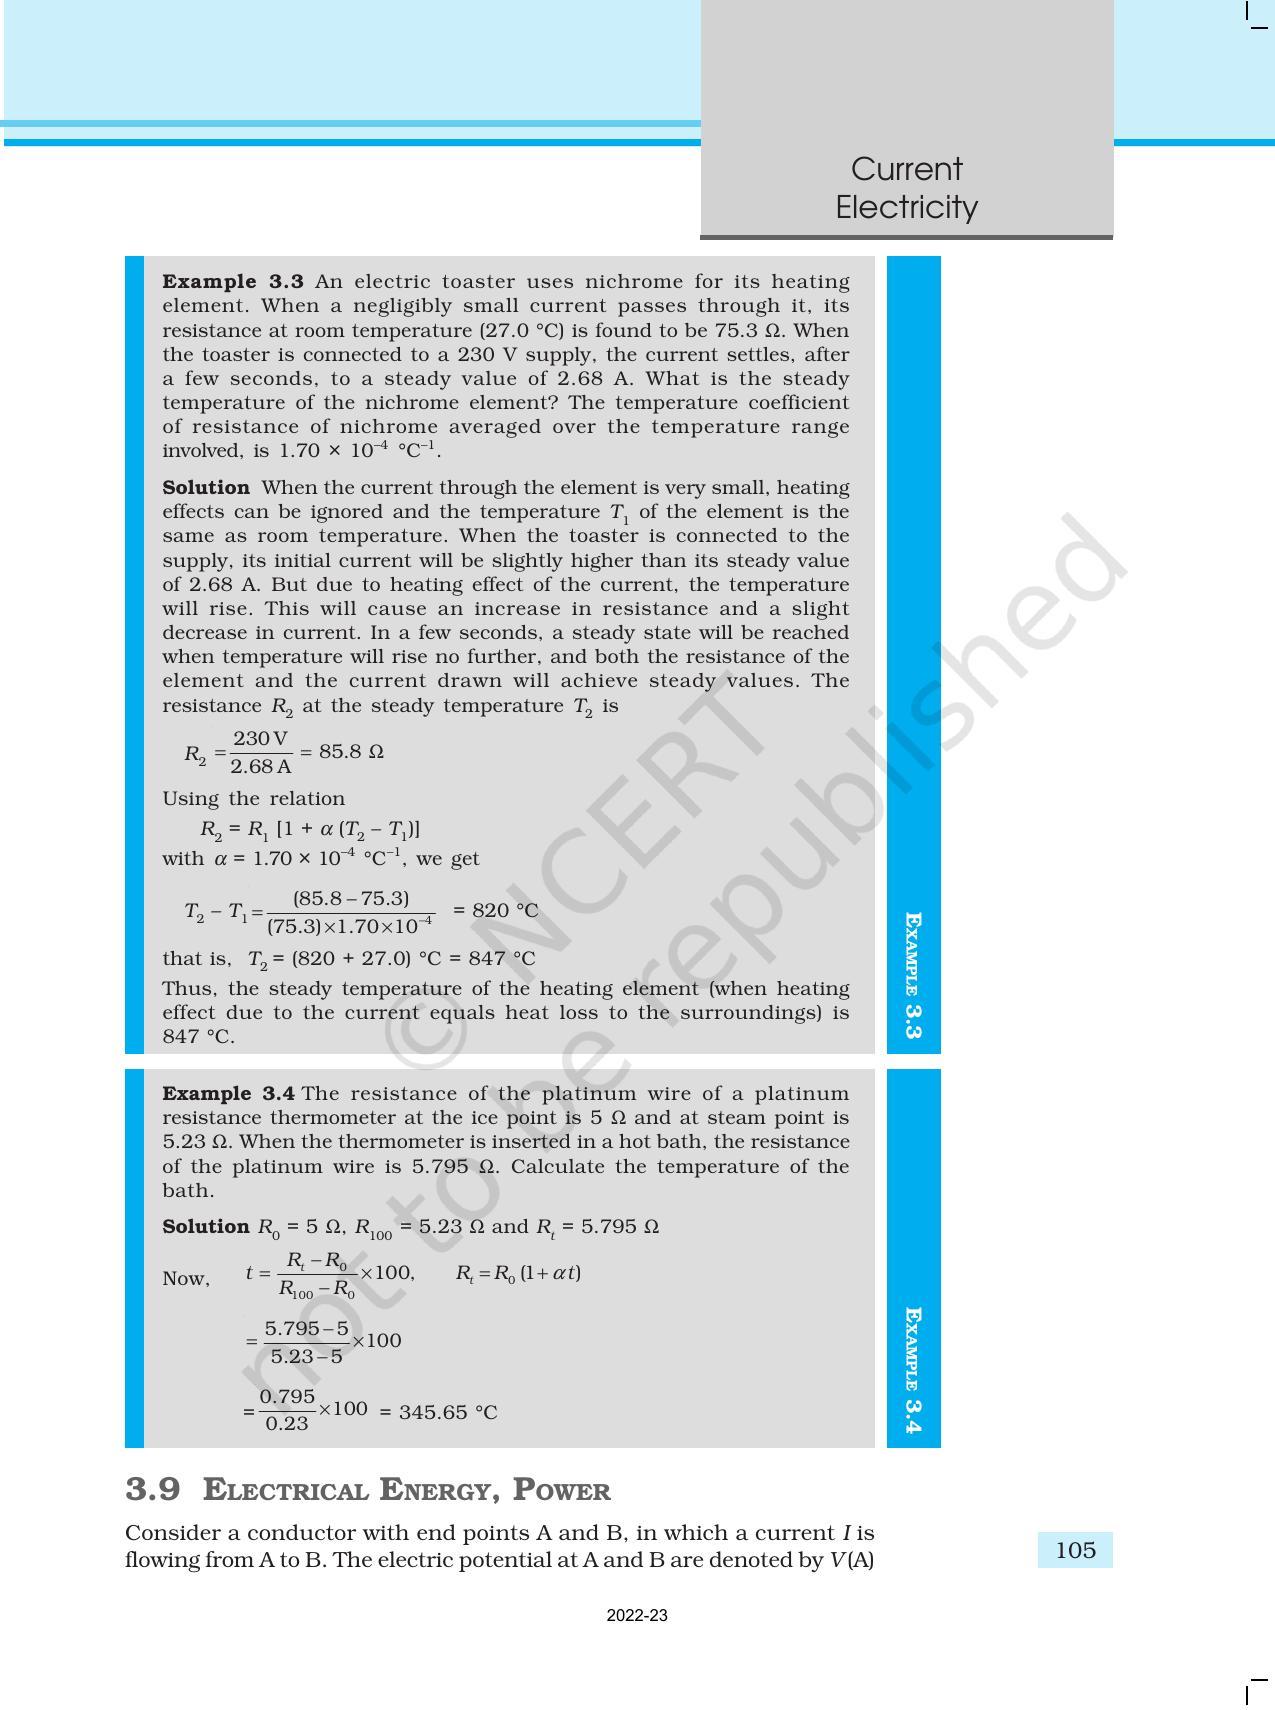 NCERT Book for Class 12 Physics Chapter 3 Current Electricity - Page 13